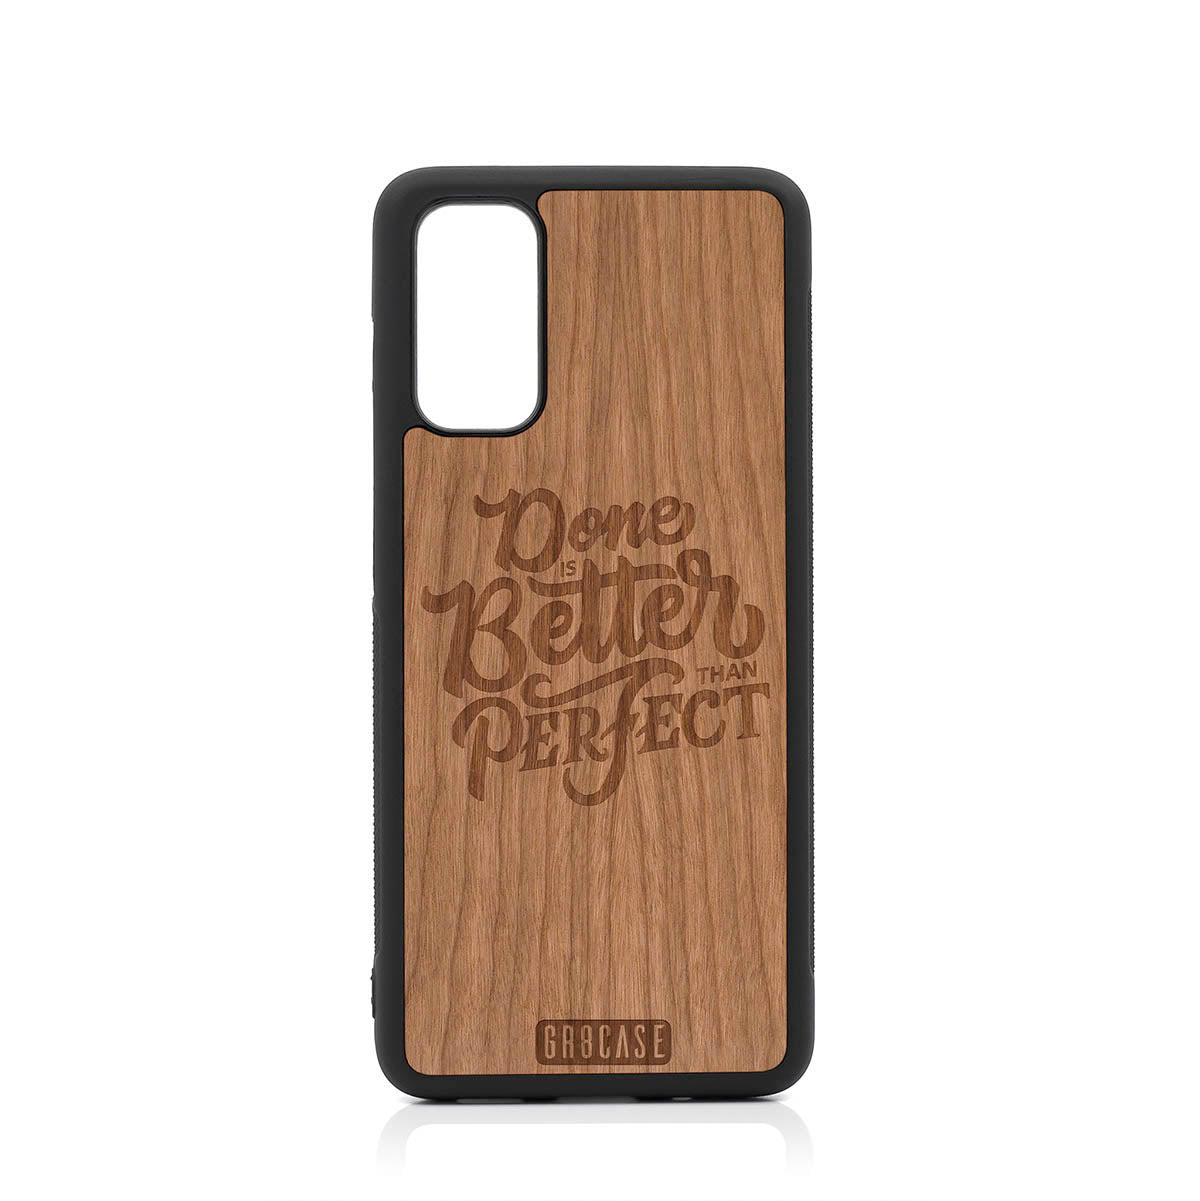 Done Is Better Than Perfect Design Wood Case For Samsung Galaxy S20 by GR8CASE